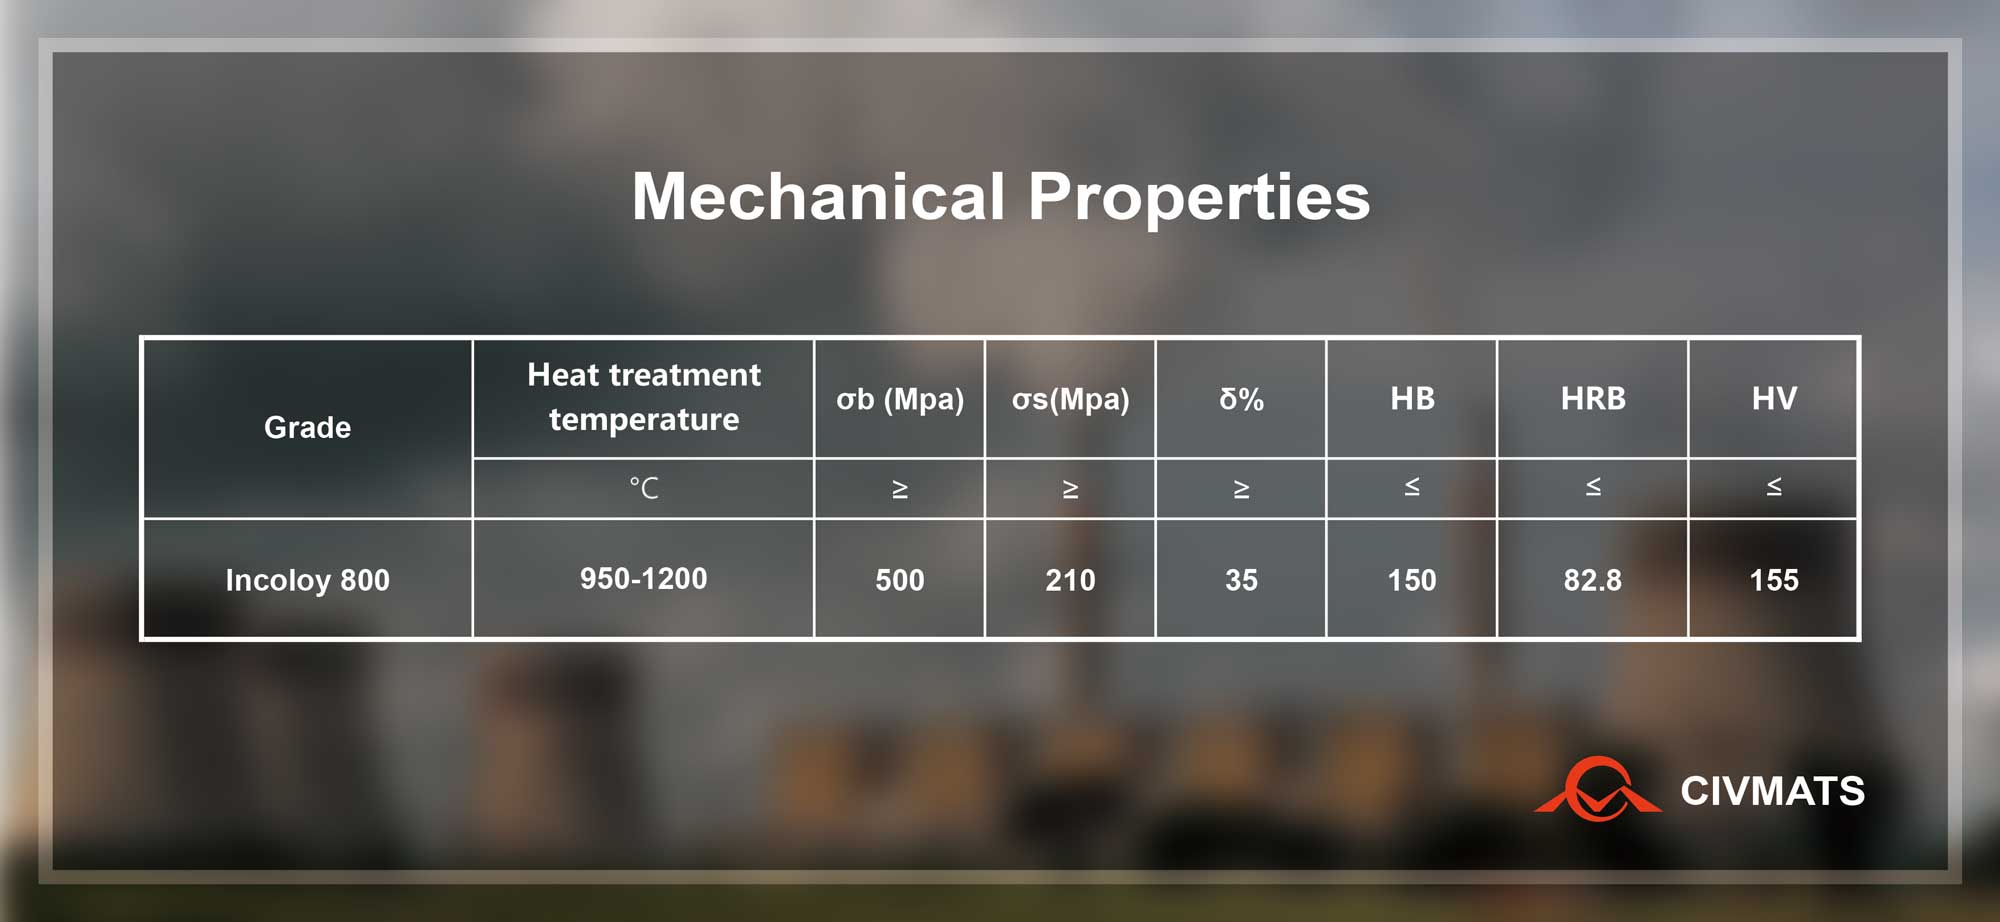 Mechanical Properties of Incoloy 800